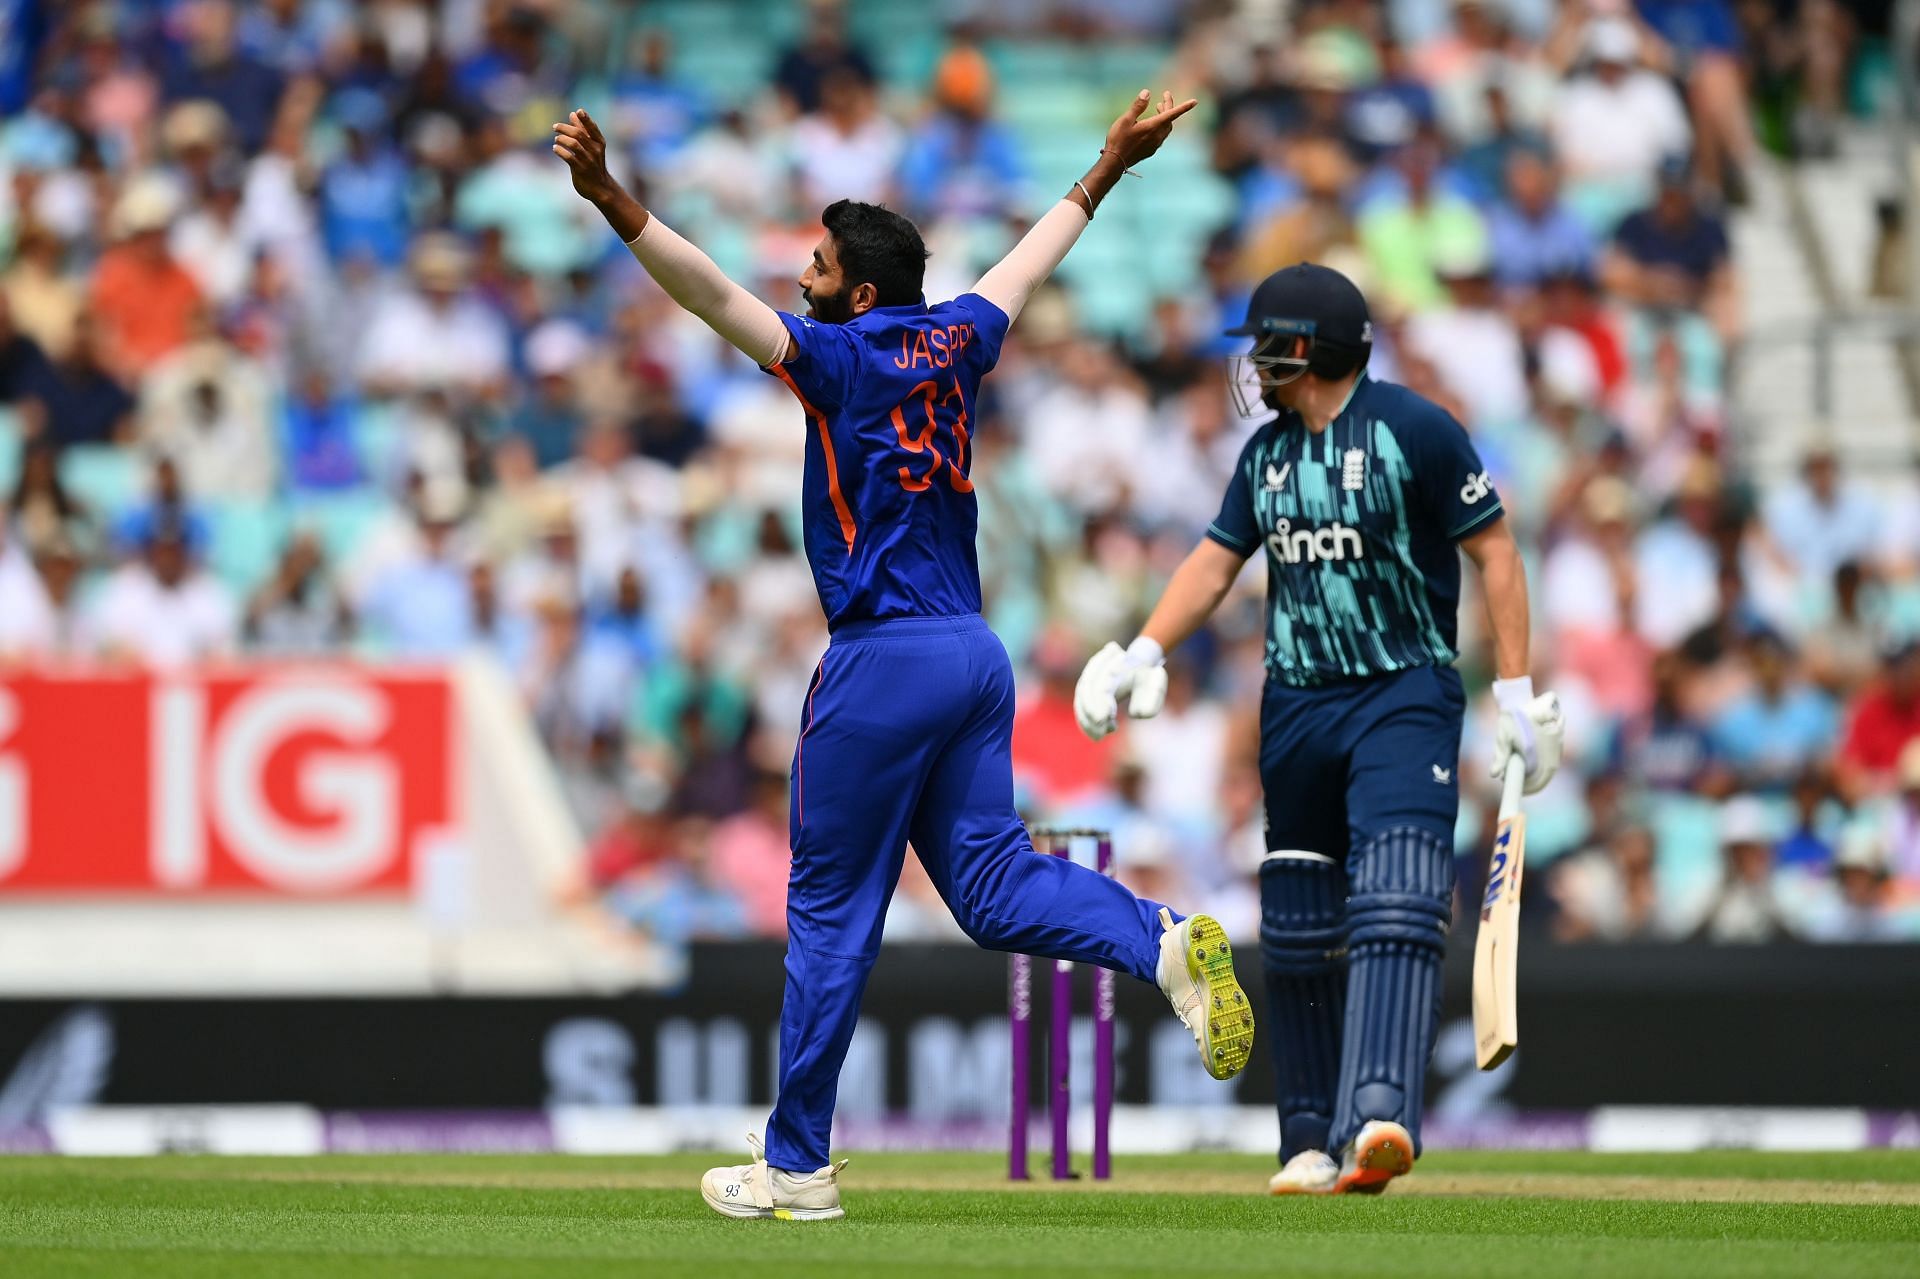 England were handed a 10-wicket drubbing by Team India in the first ODI